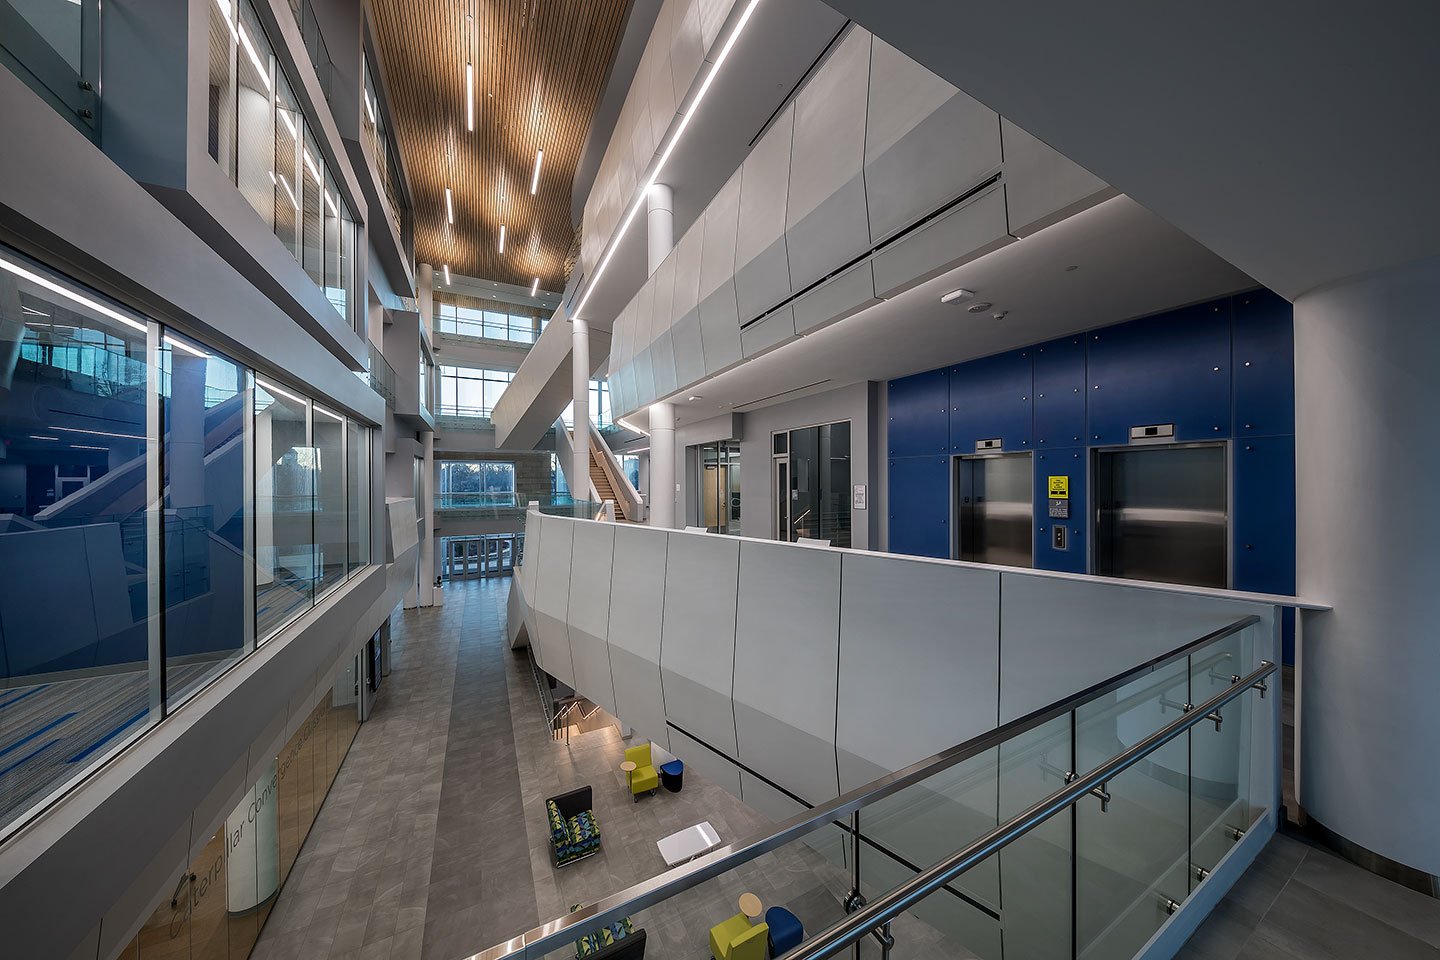 Designed to combine the College of Business and the College of Engineering into a shared facility, the new Bradley University Convergence Center allows each college to maintain separate identities, while sharing common support functions.